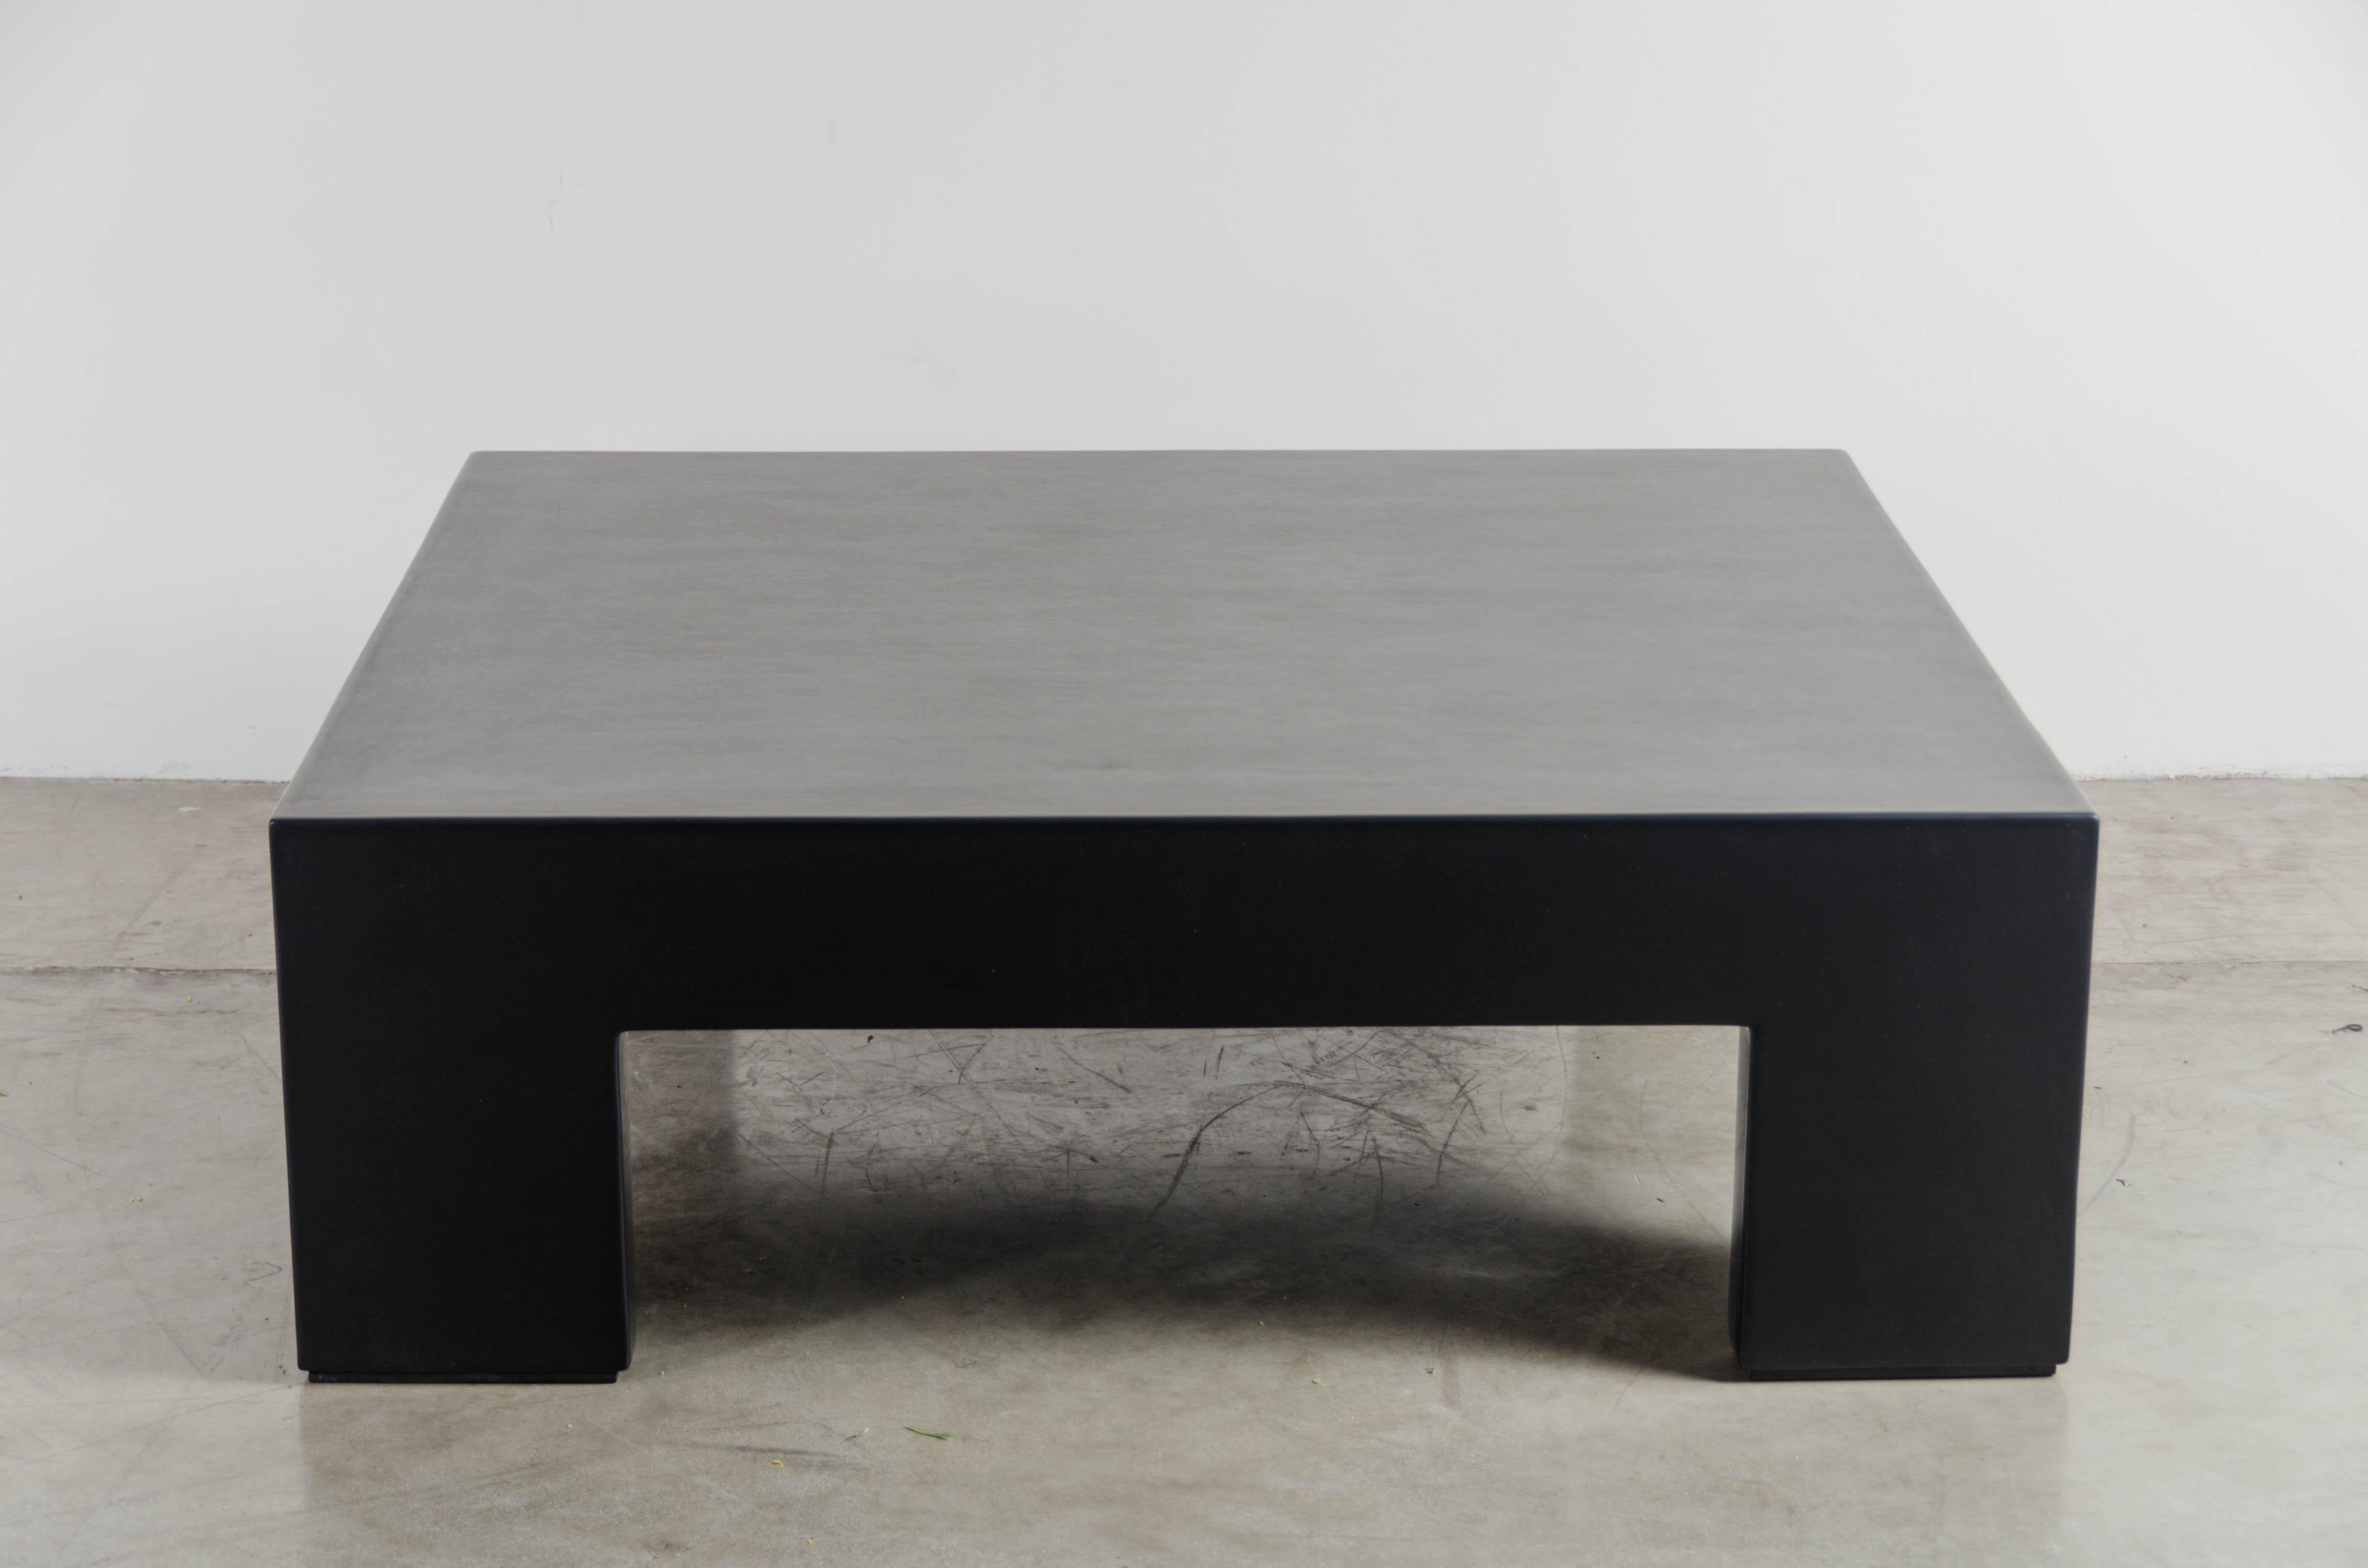 Low square table
Black Lacquer (80 coats)
Handmade
Limited Edition

Lacquer is a technique that dates back to the Shang dynasty, circa 1600-1100 B.C. These pieces are made with at least 60 coats of organic lacquer. Each layer of lacquer is